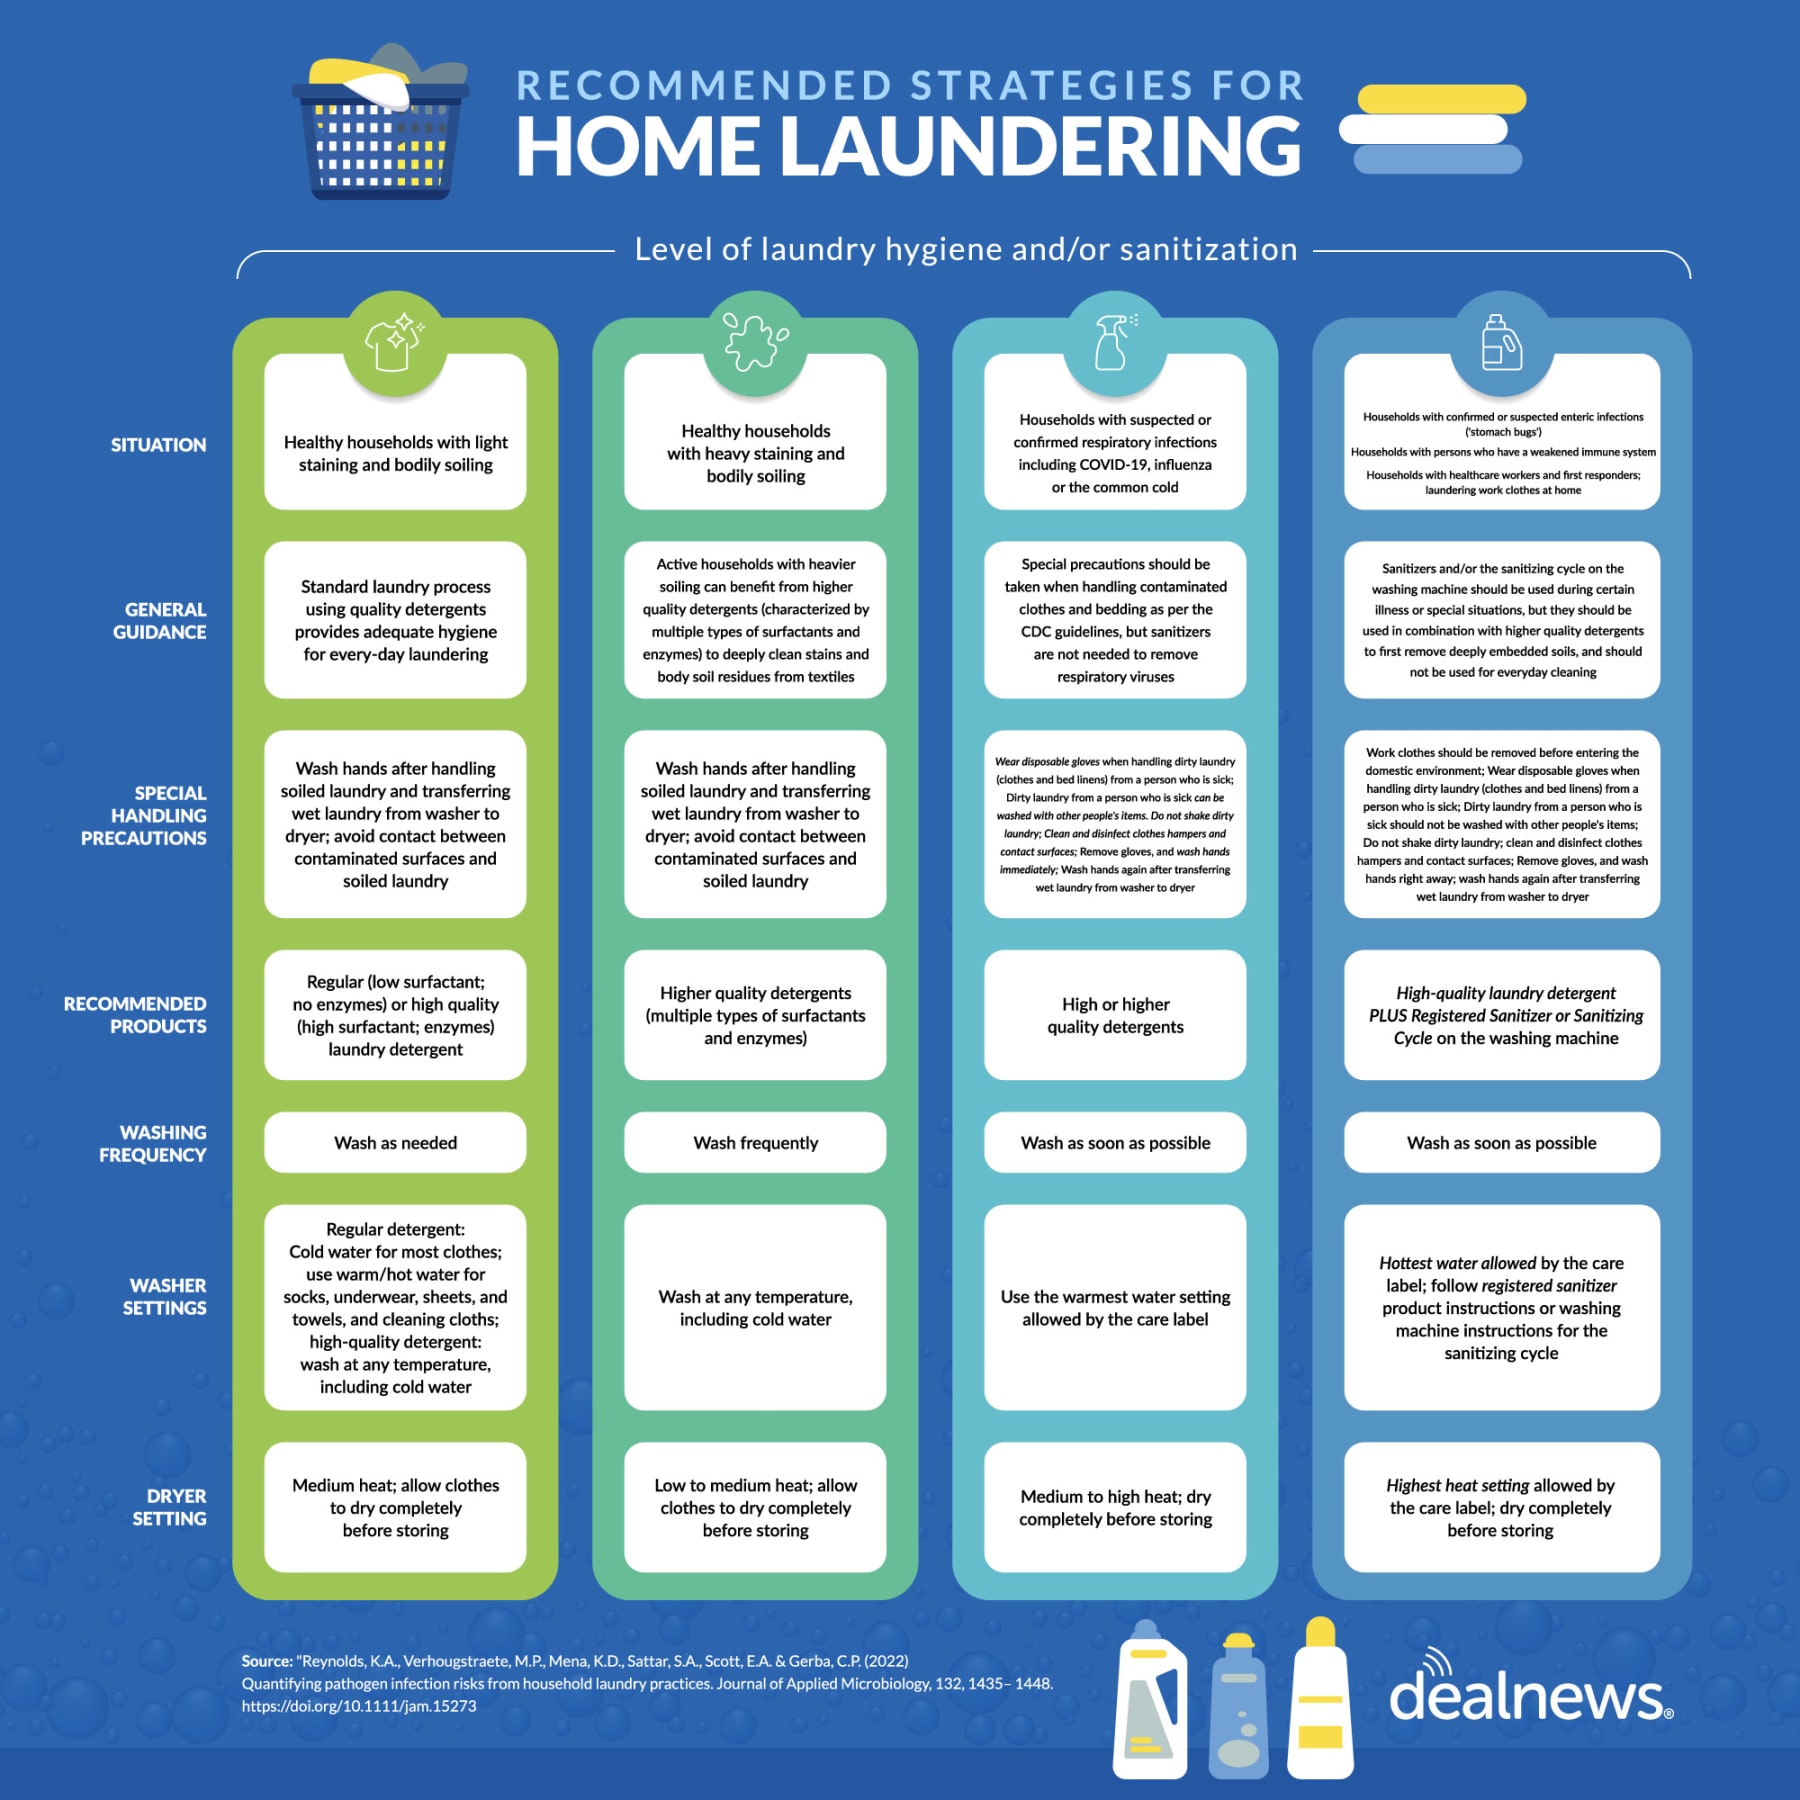 An infographic of recommended strategies for home laundering